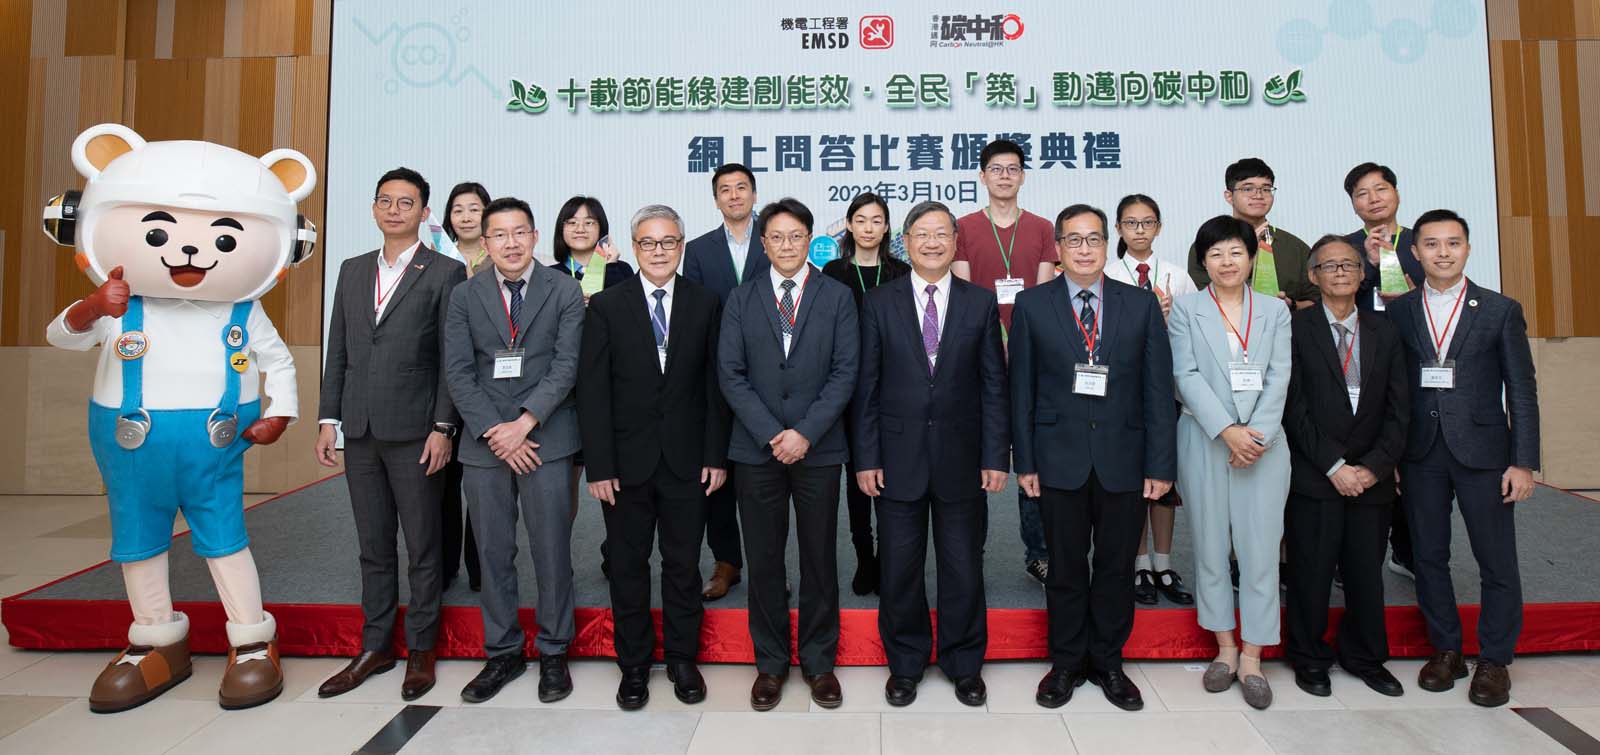 Director of the Electrical & Mechanical Services Department, Mr. PANG
                            Yiu Hung (fifth from the right of the first row), Deputy Director/Regulatory Services, Mr.
                            POON Kwok Ying (seventh from the right of the first row), Chairman of the Judging Panel, Ir
                            Prof. Michael LEUNG (sixth from the right of the first row) pictured with all guests and
                            winners.